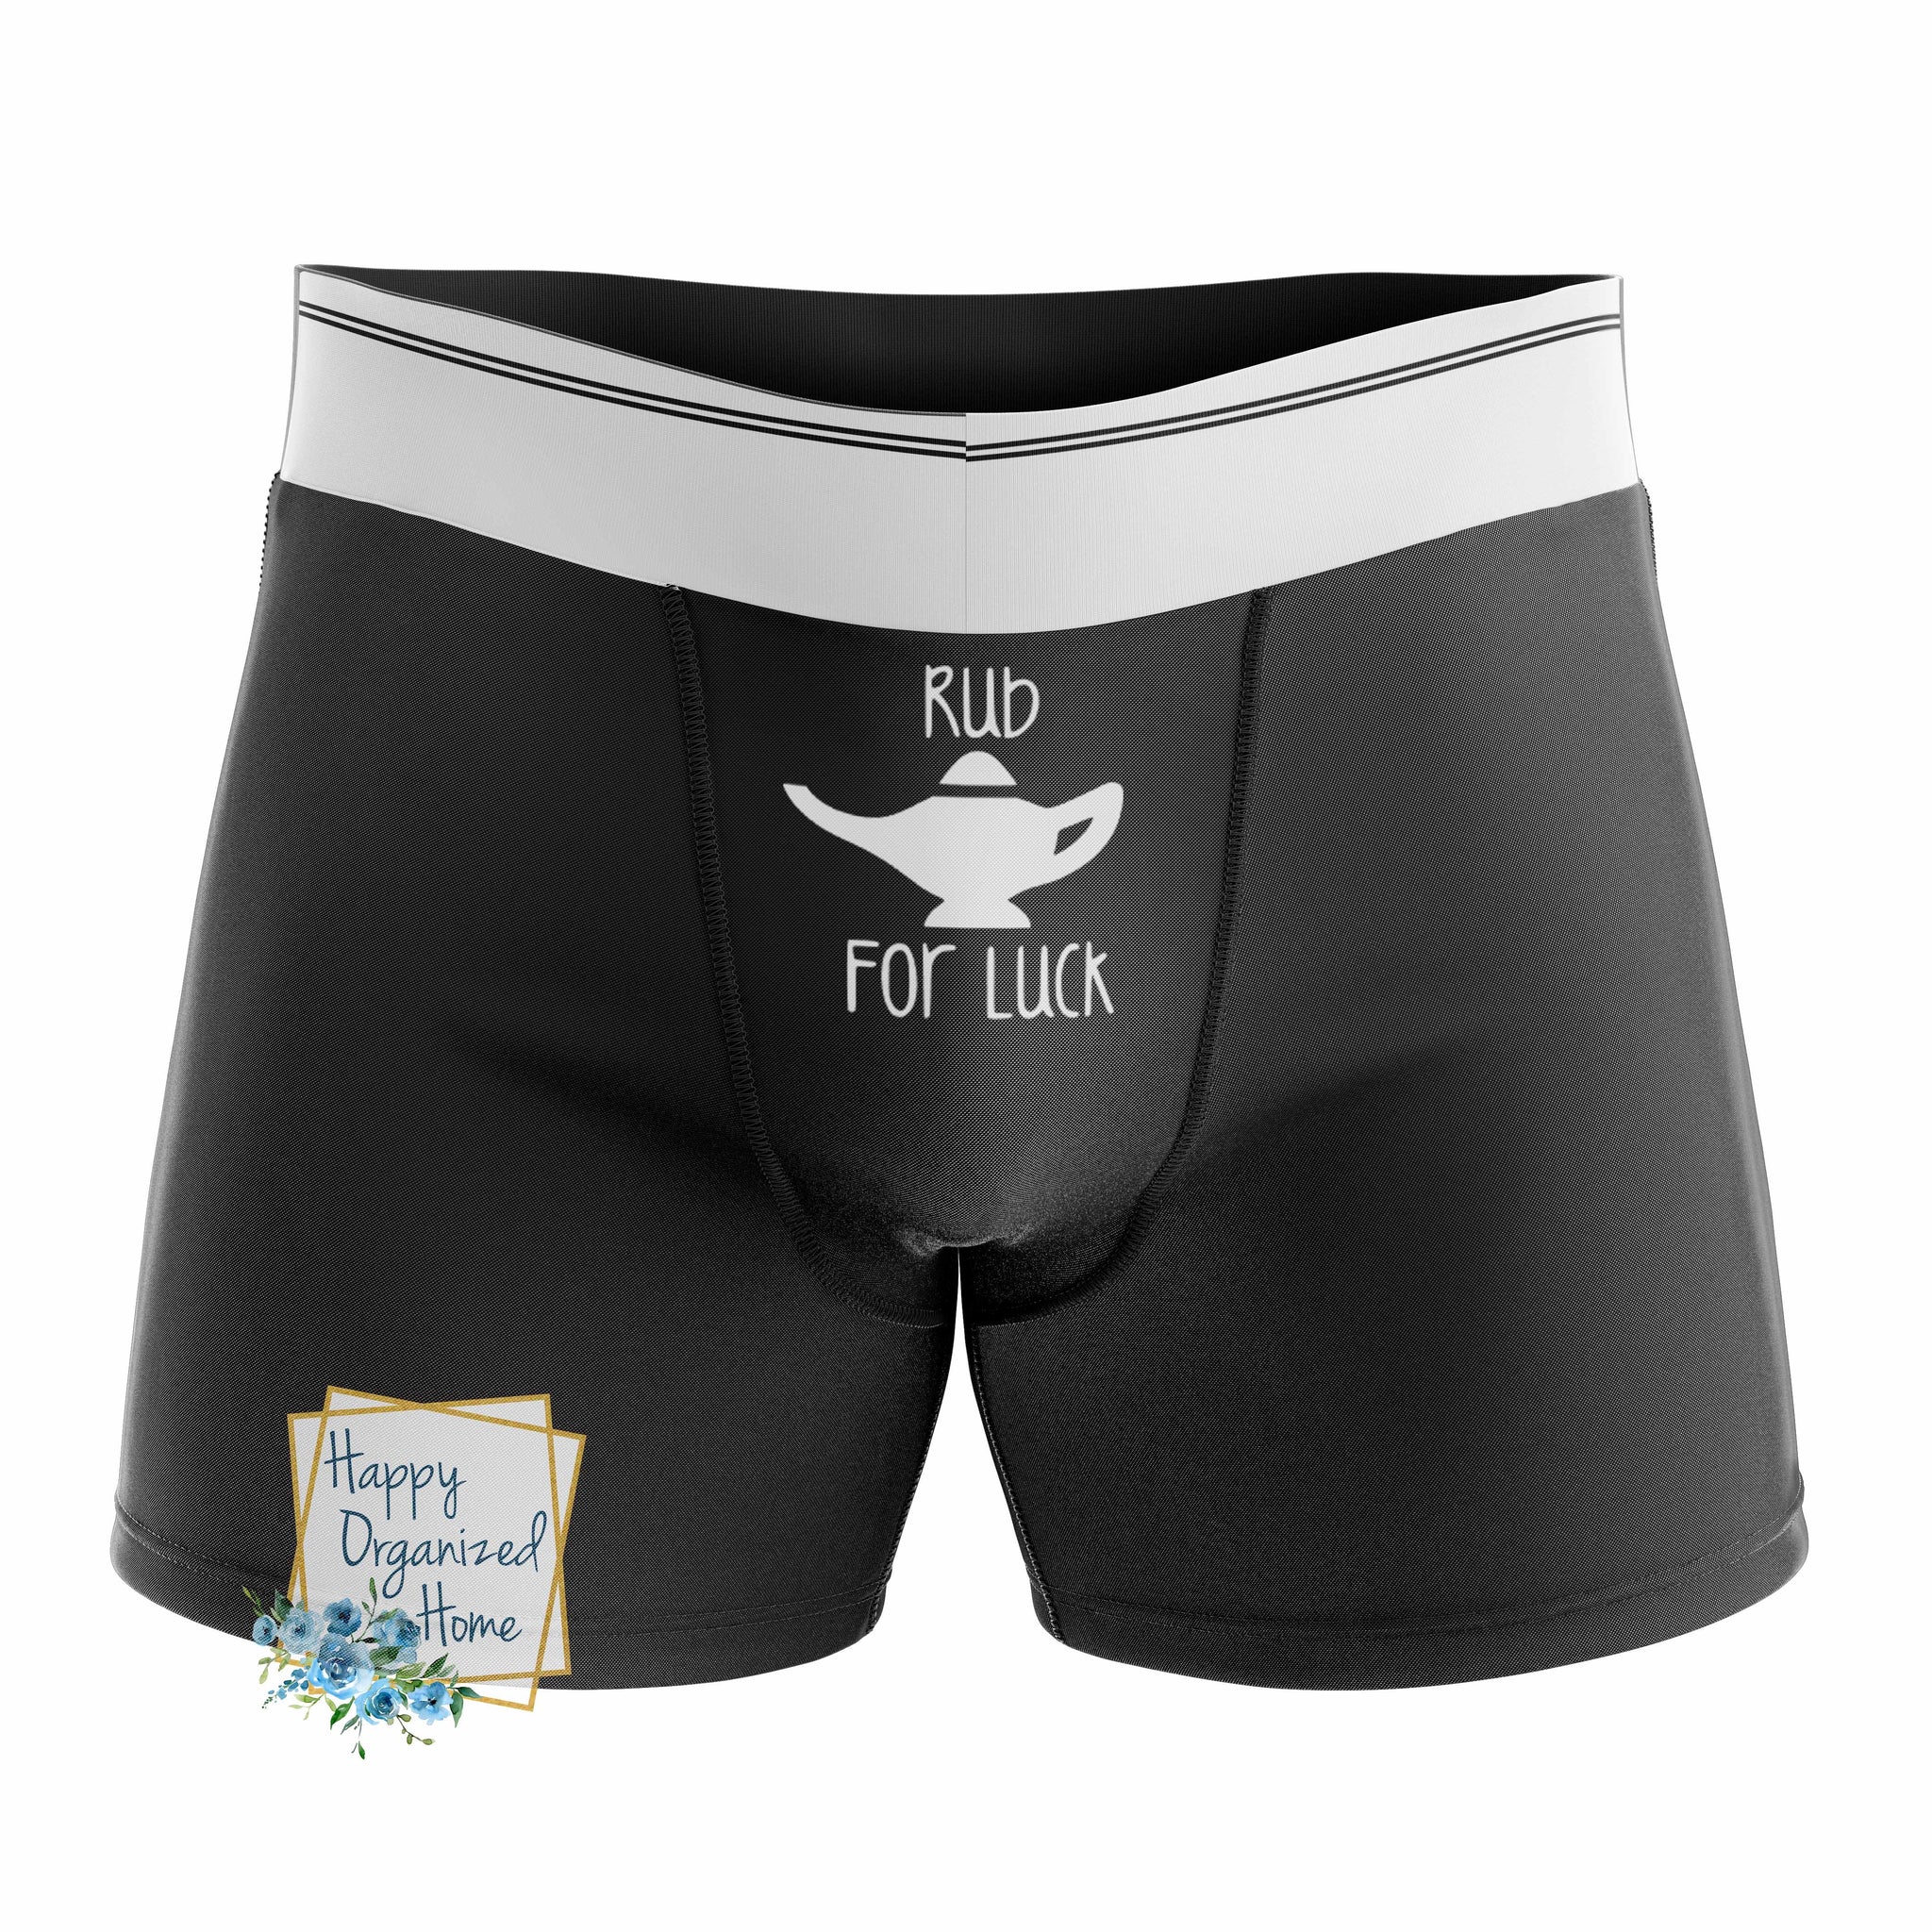 Rub for Luck - Men's Naughty Boxer Briefs – Happy Organized Home